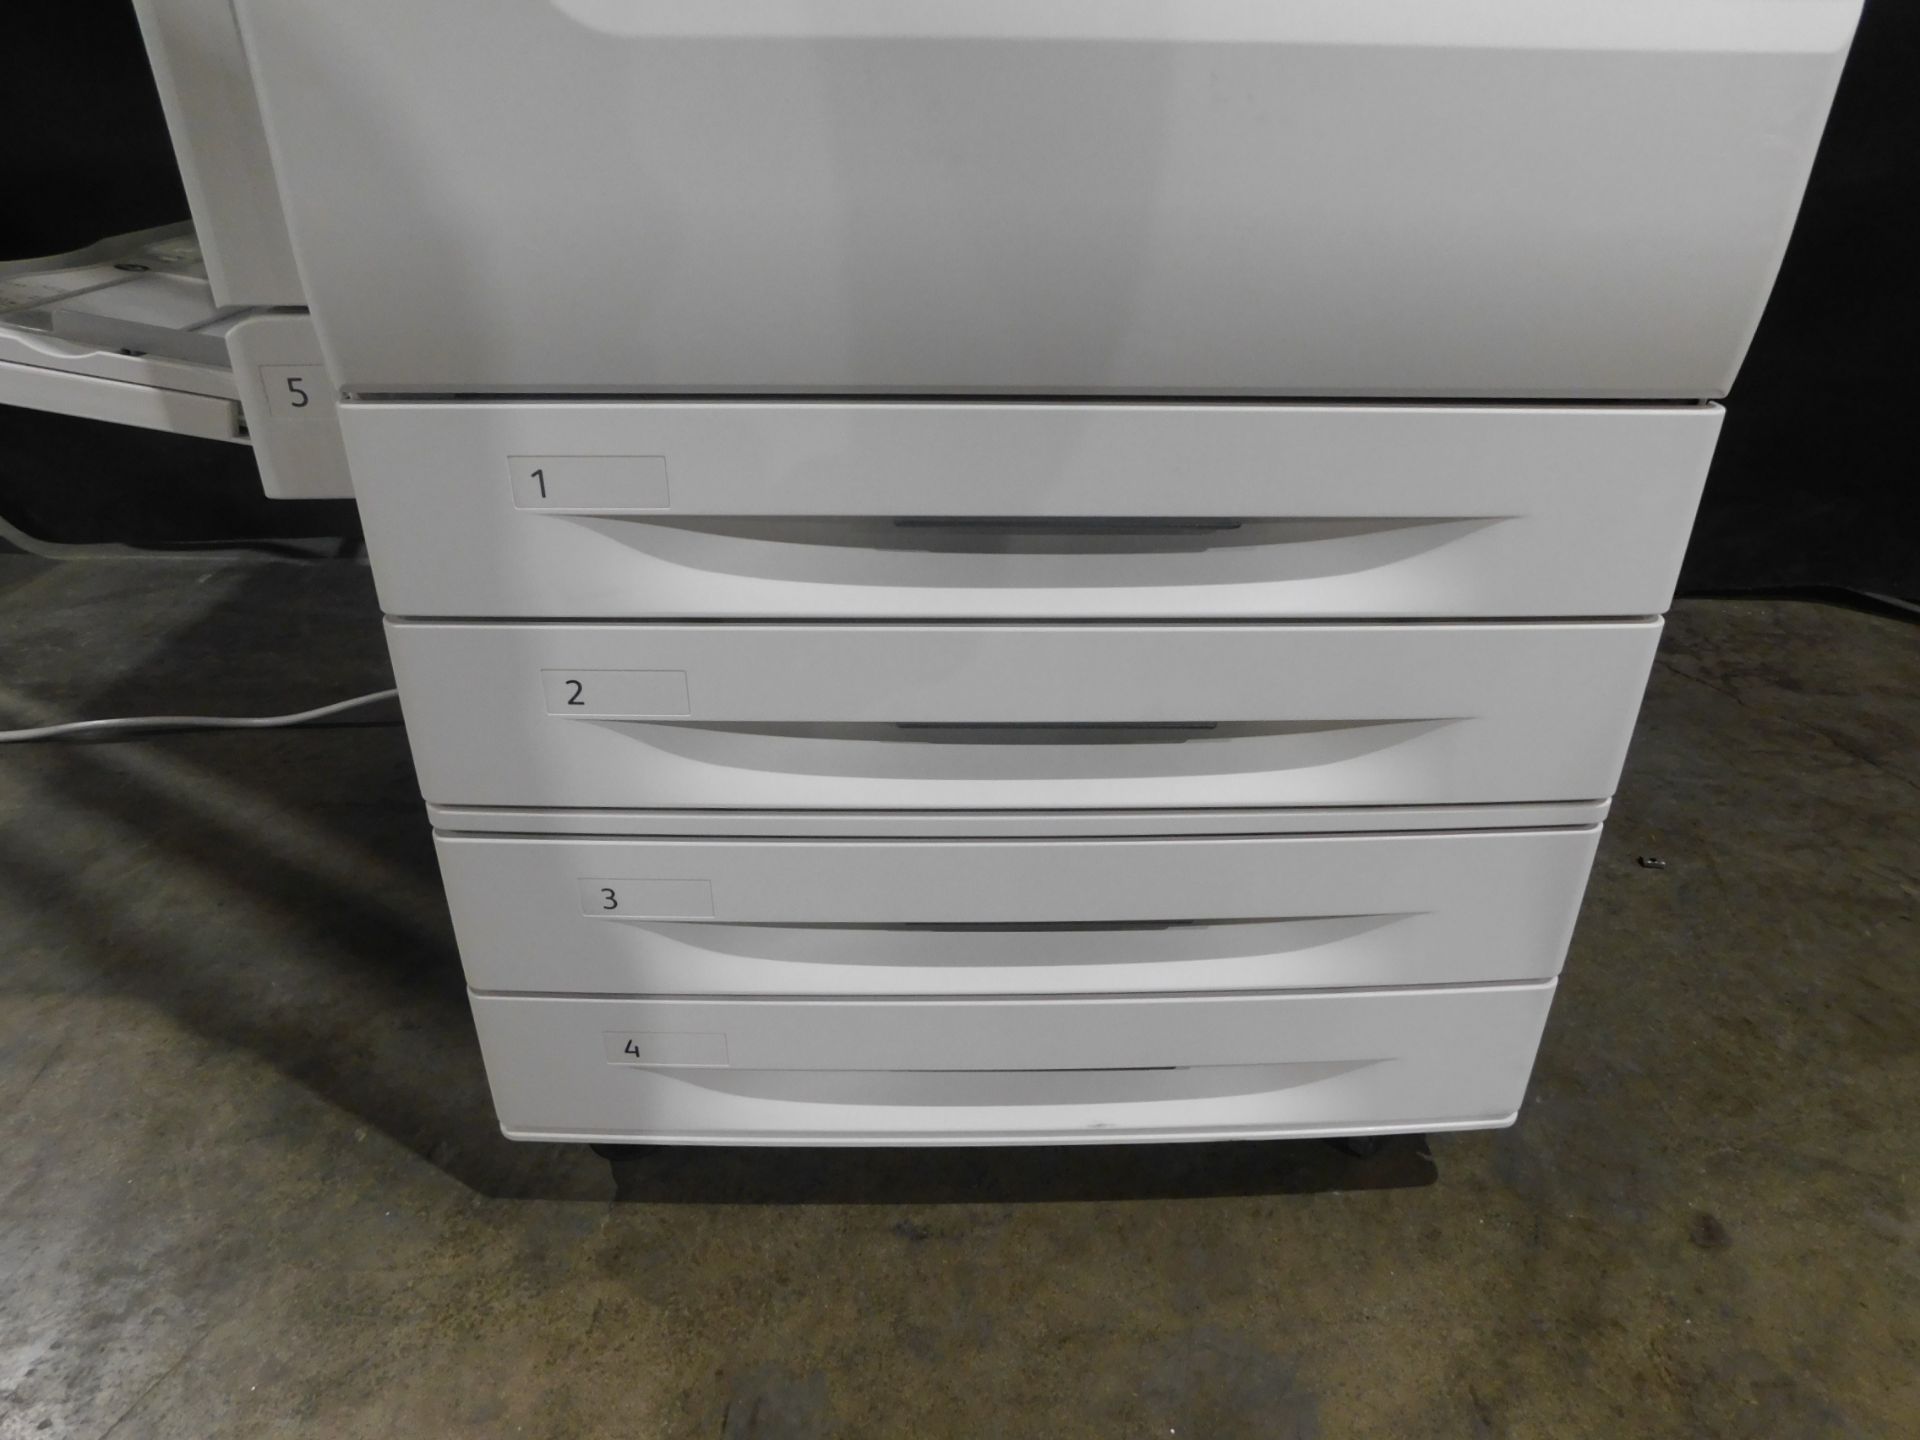 Xerox Work Centre 7225 Multifunction Color Copier/Printer, SN LX5691483, Total Impressions: 55, - Image 4 of 10